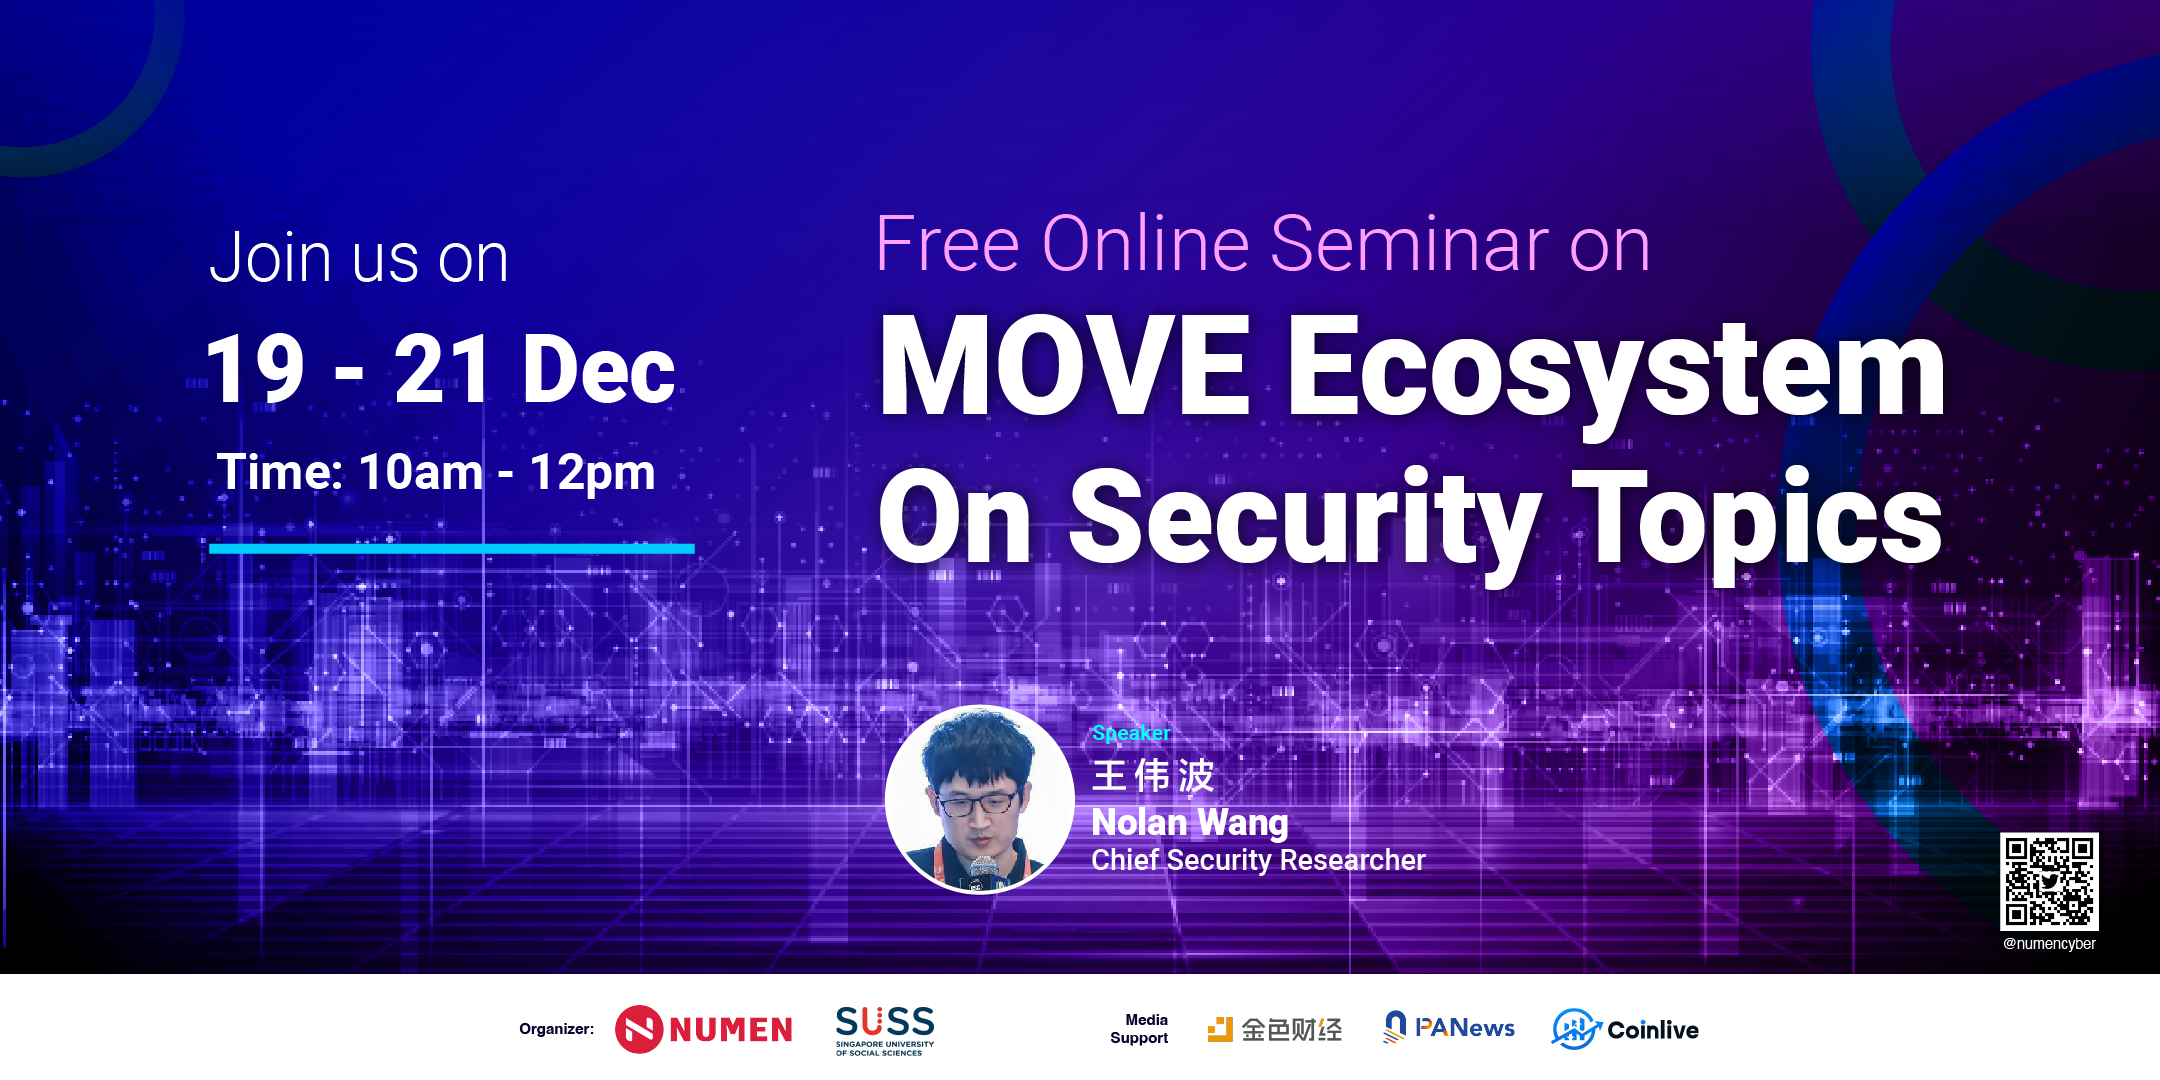 Free Online Seminar on Security Topics on MOVE Ecosystem